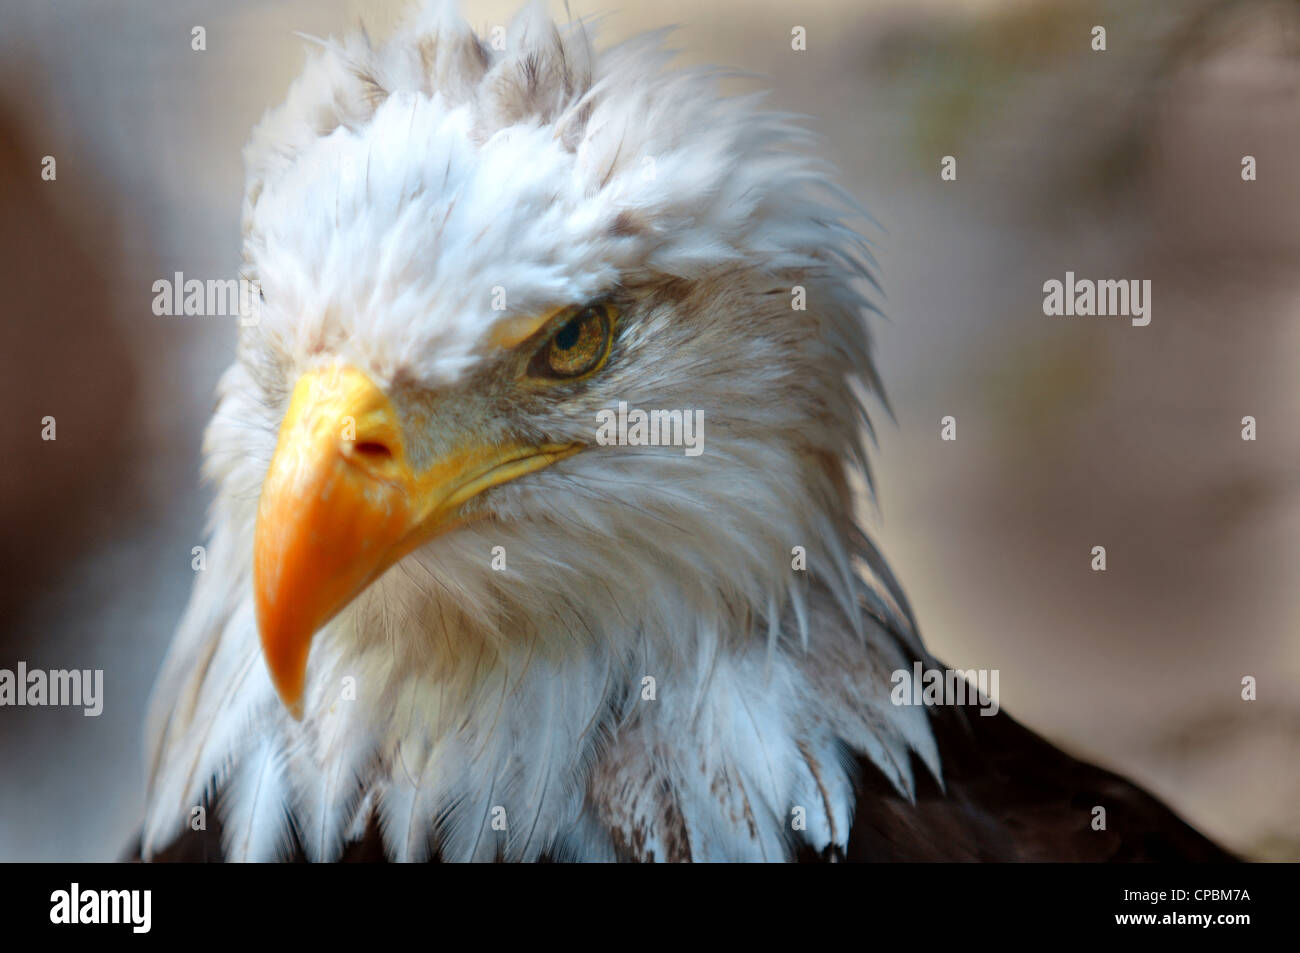 American bald eagle portrait close-up of his head or face looking downward Stock Photo